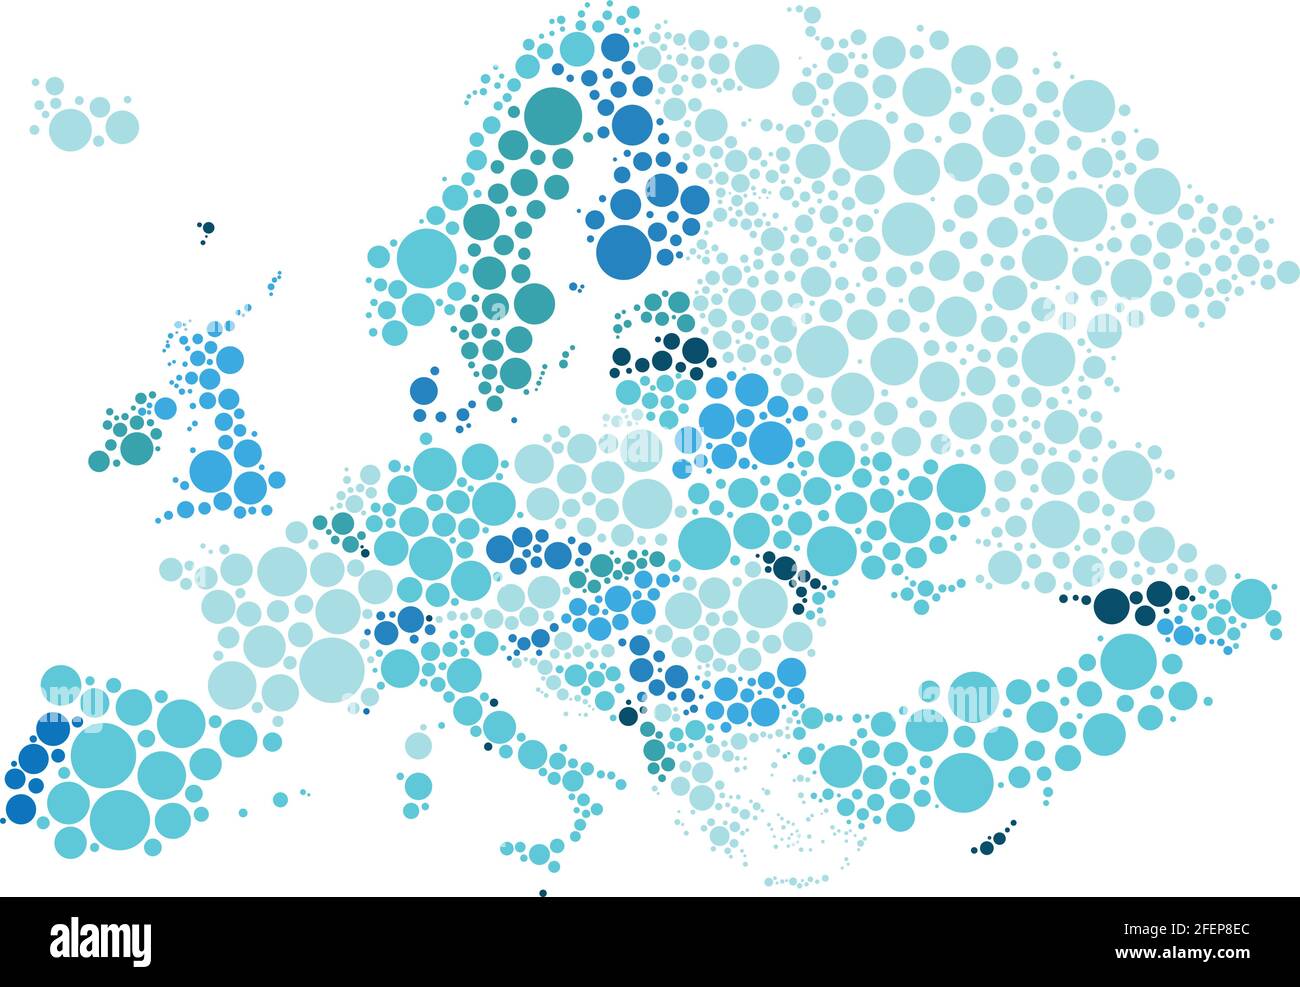 Vector illustration of political map of Europe designed with different sizes and tones of blue dots. Stock Vector